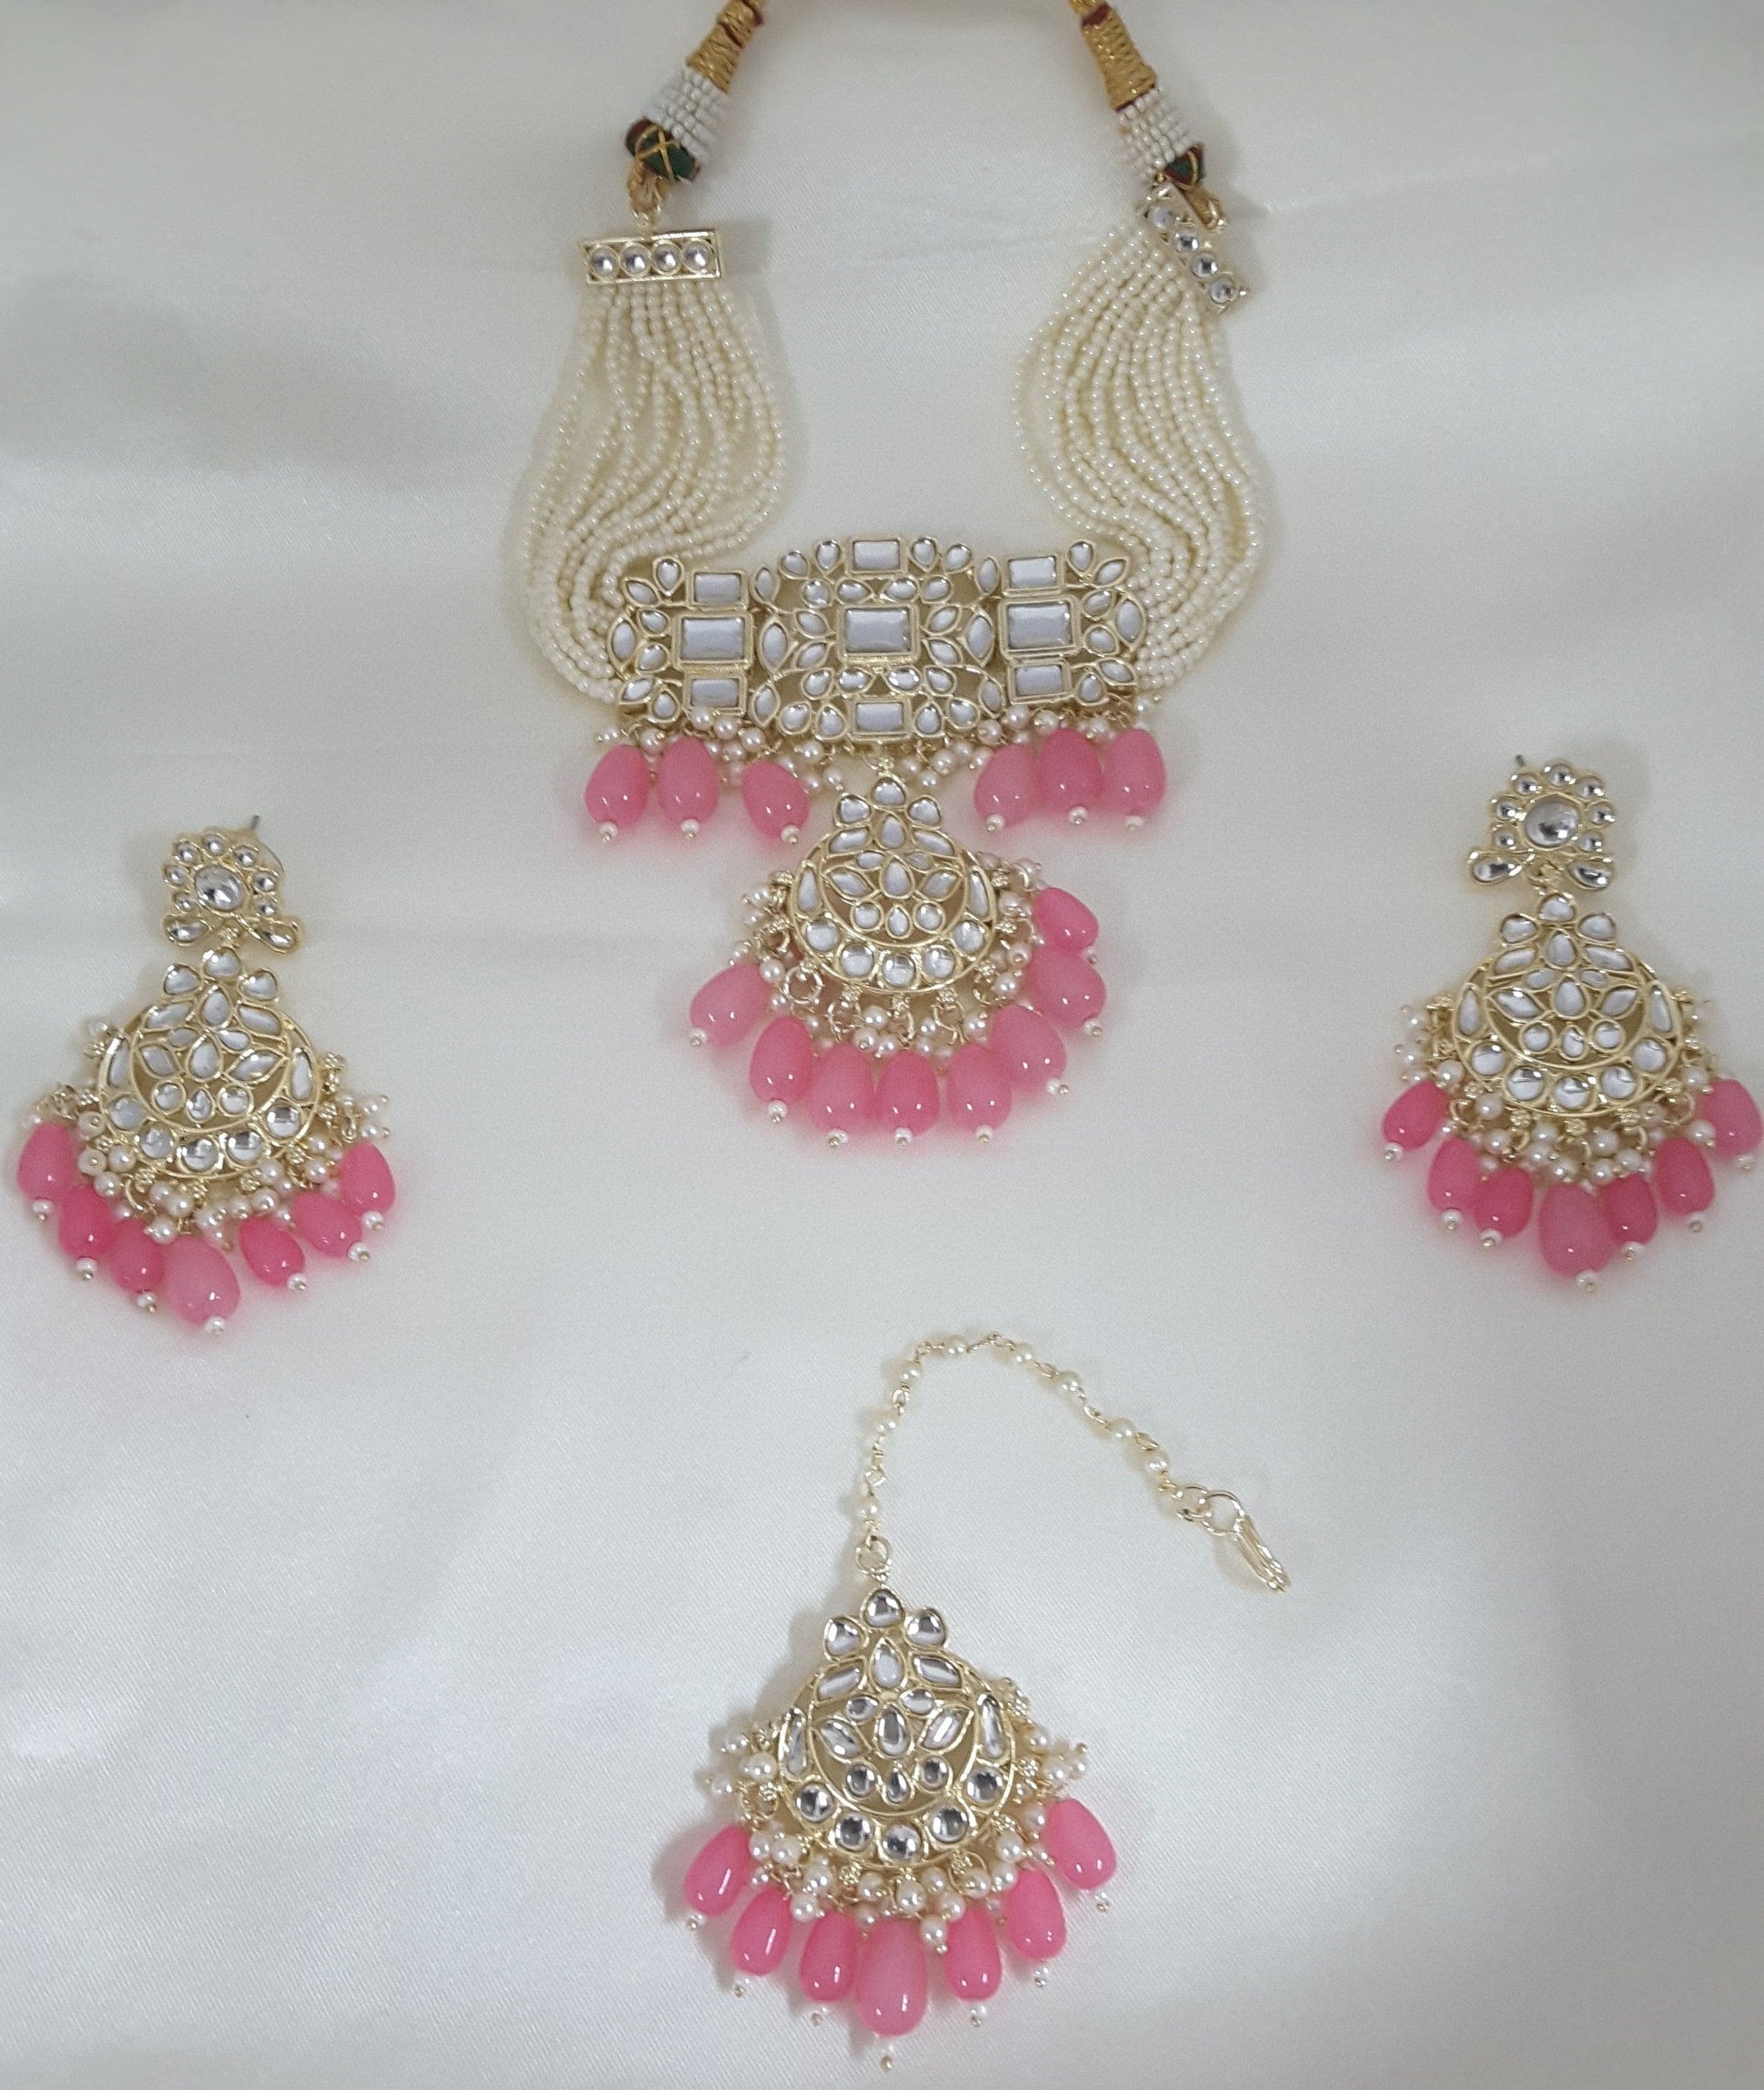 Moonstruck Traditional Indian White Kundan and Pink Beads Choker Necklace Earring Set with Maang tikka for Women(Pink) - www.MoonstruckINC.com